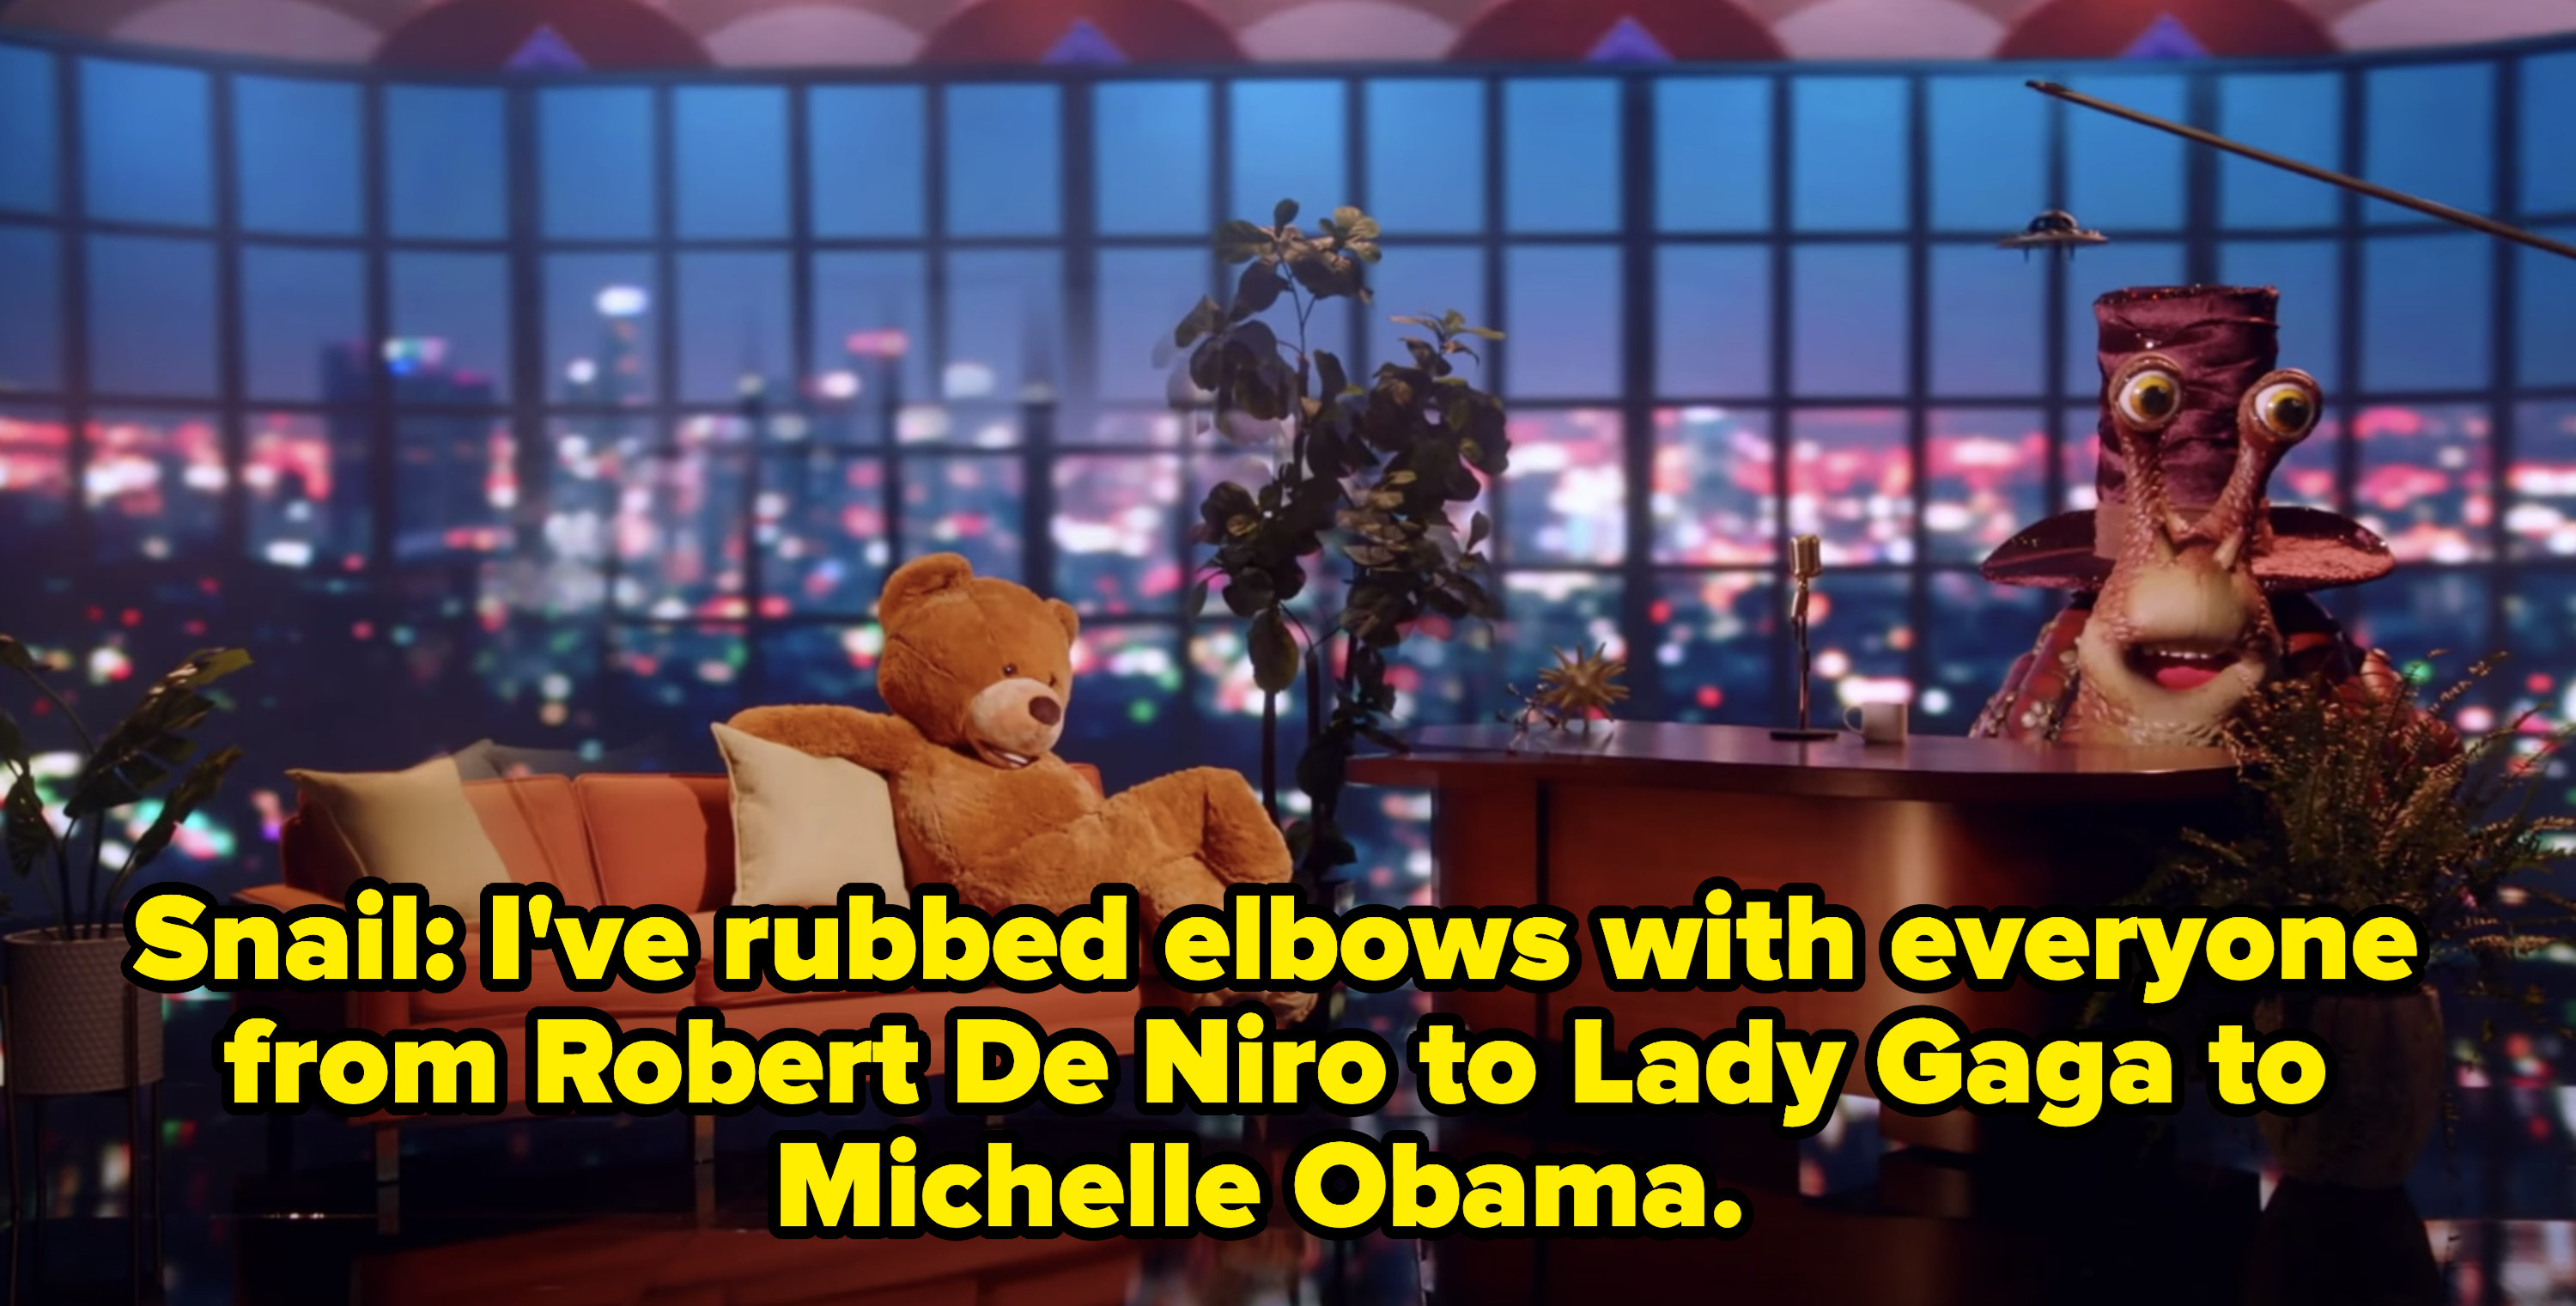 Snail says, &quot;I&#x27;ve rubbed elbows with everyone from Robert De Niro to Lady Gaga to Michelle Obama&quot;